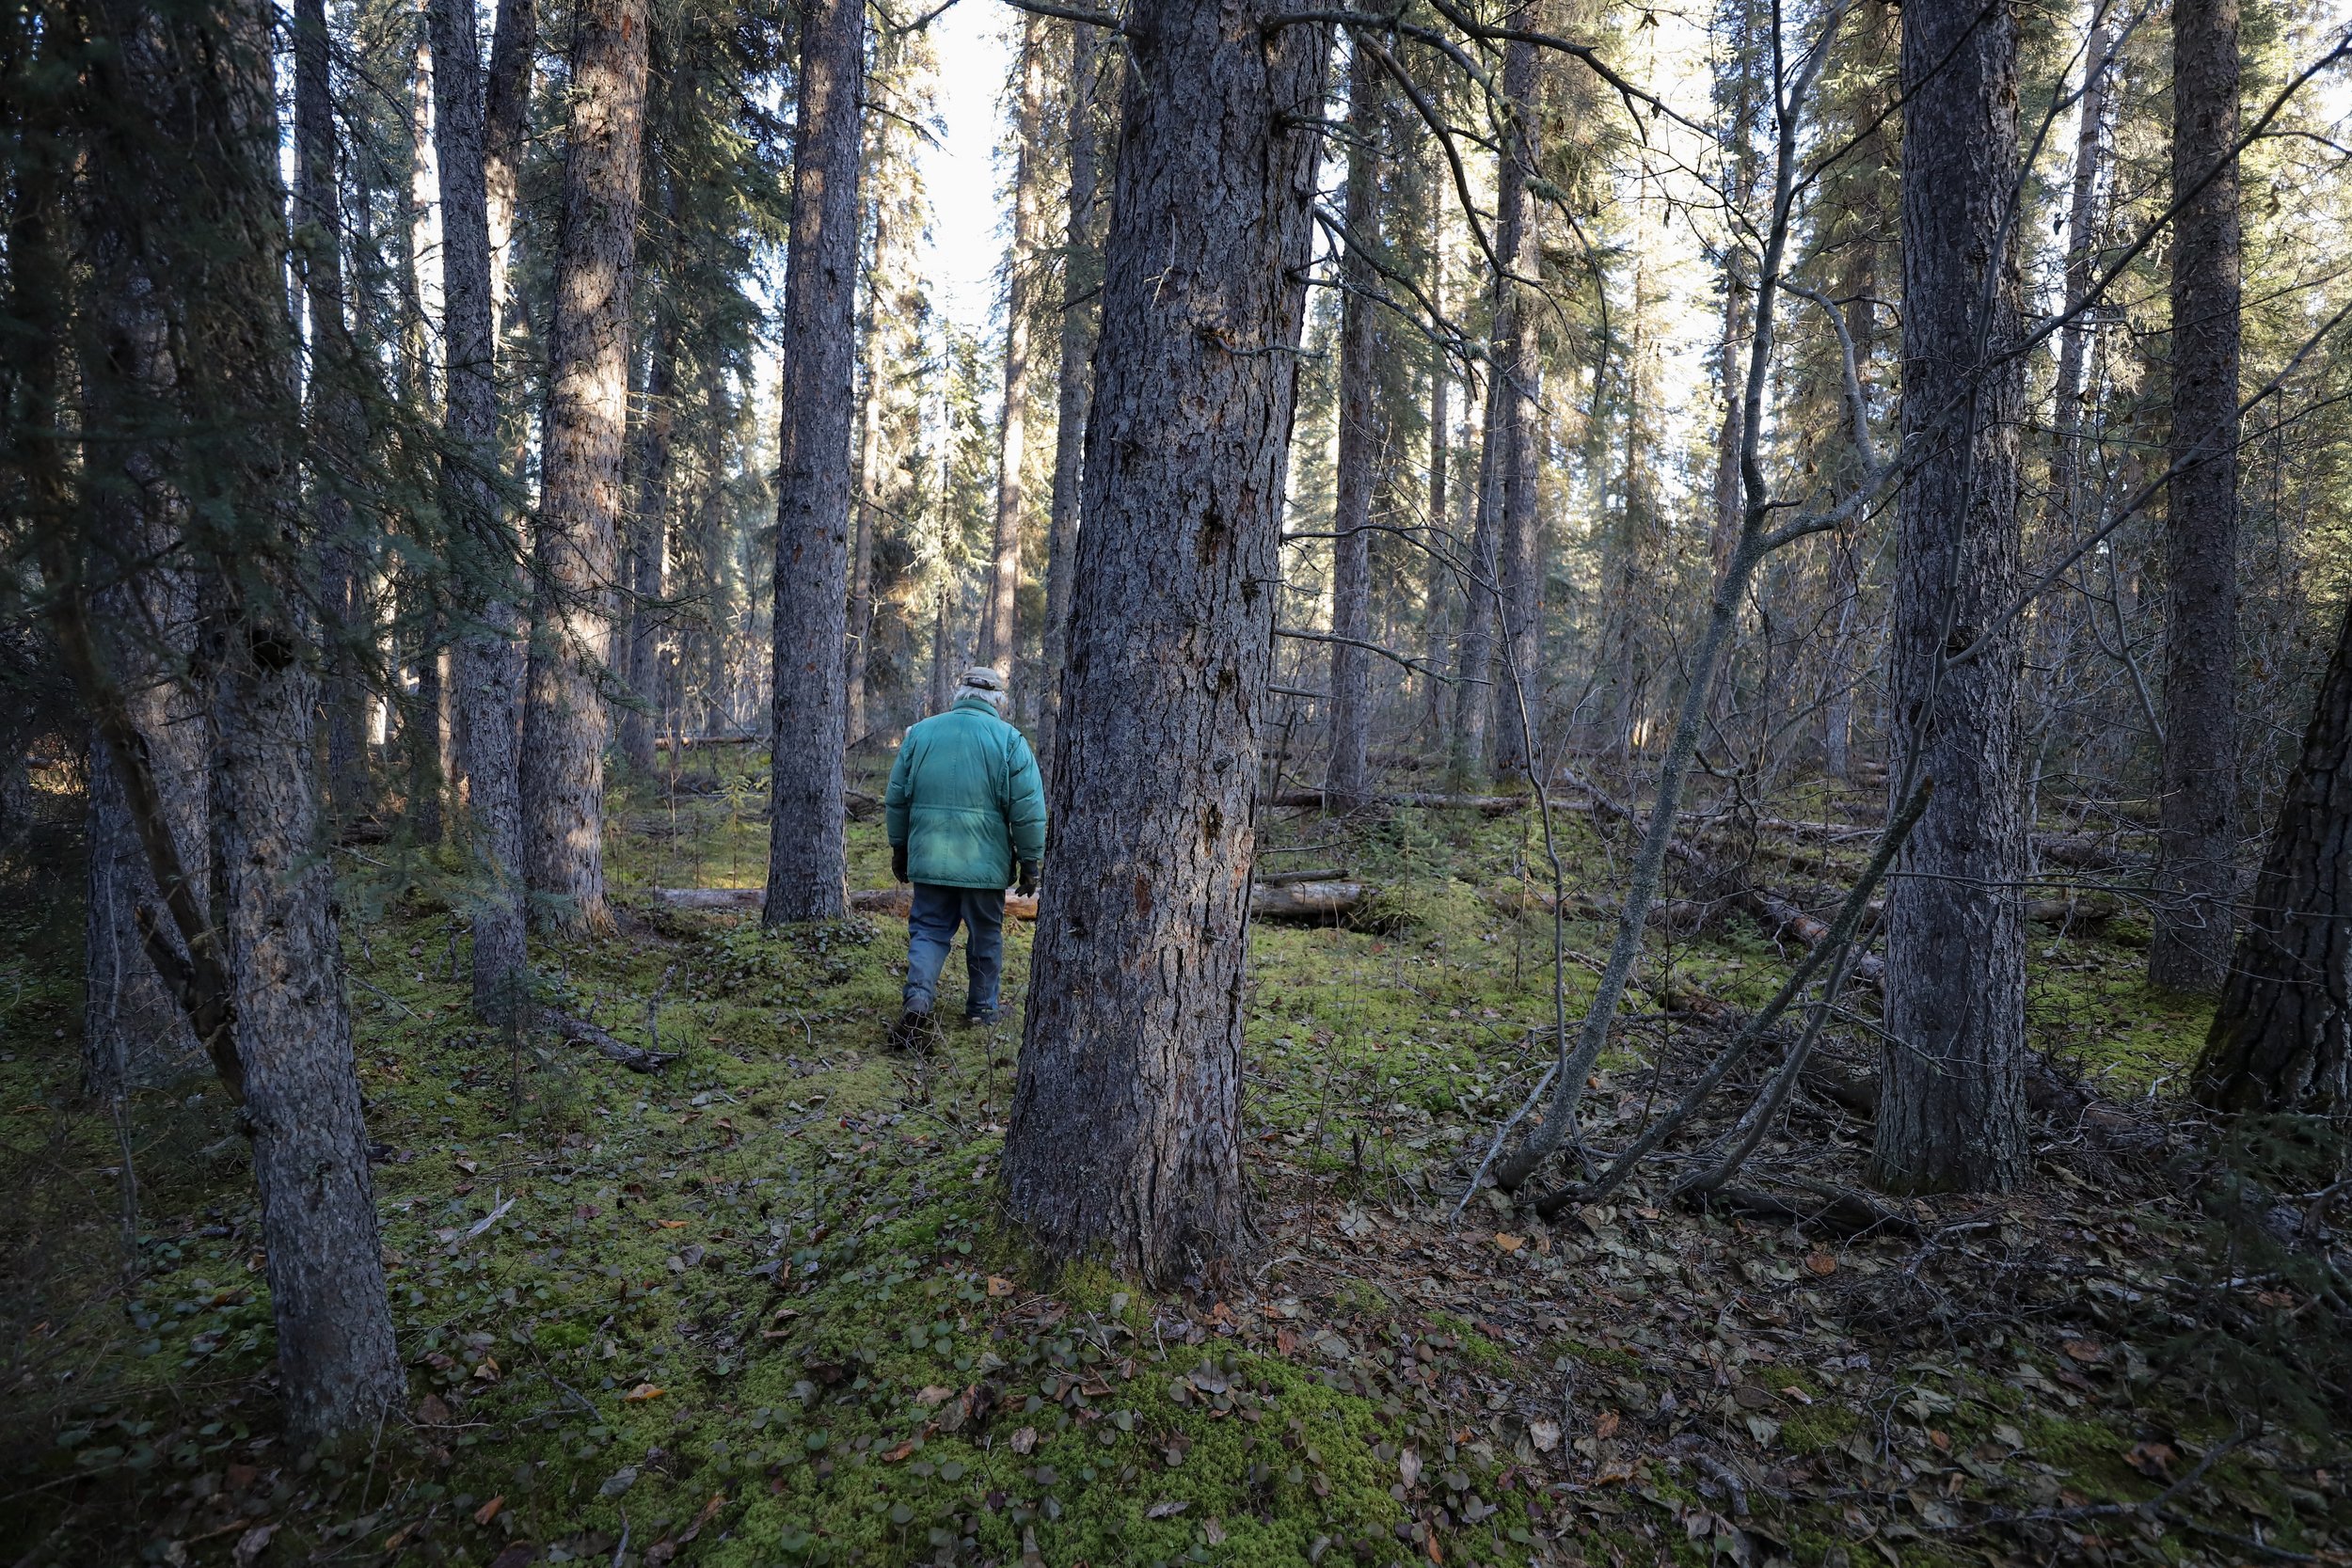  Steve wanders through the forest looking for signs from the Athabaskan trappers who seasonally used the area before him.  